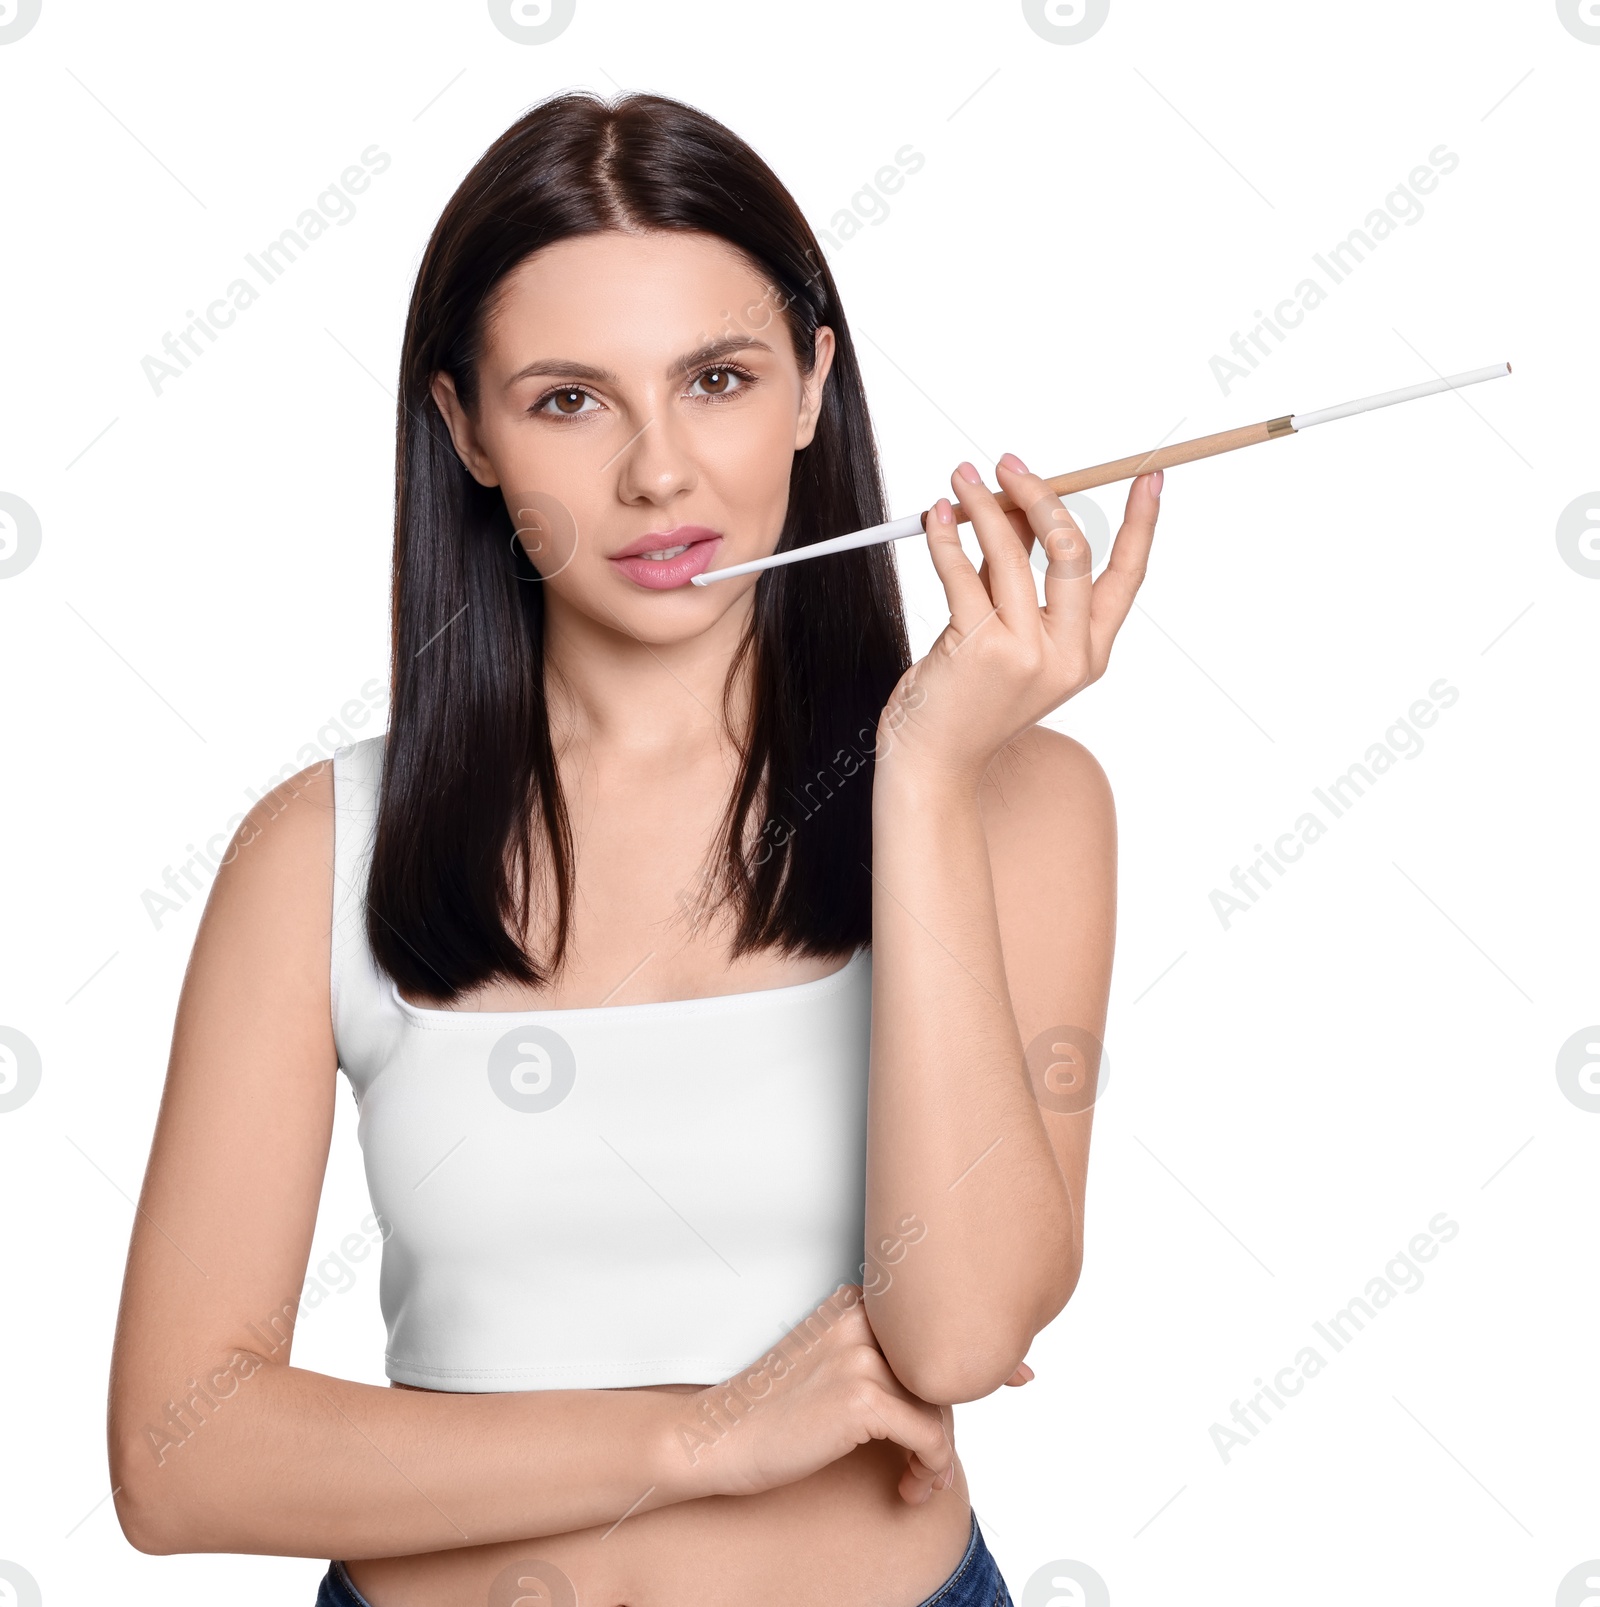 Photo of Woman using long cigarette holder for smoking isolated on white